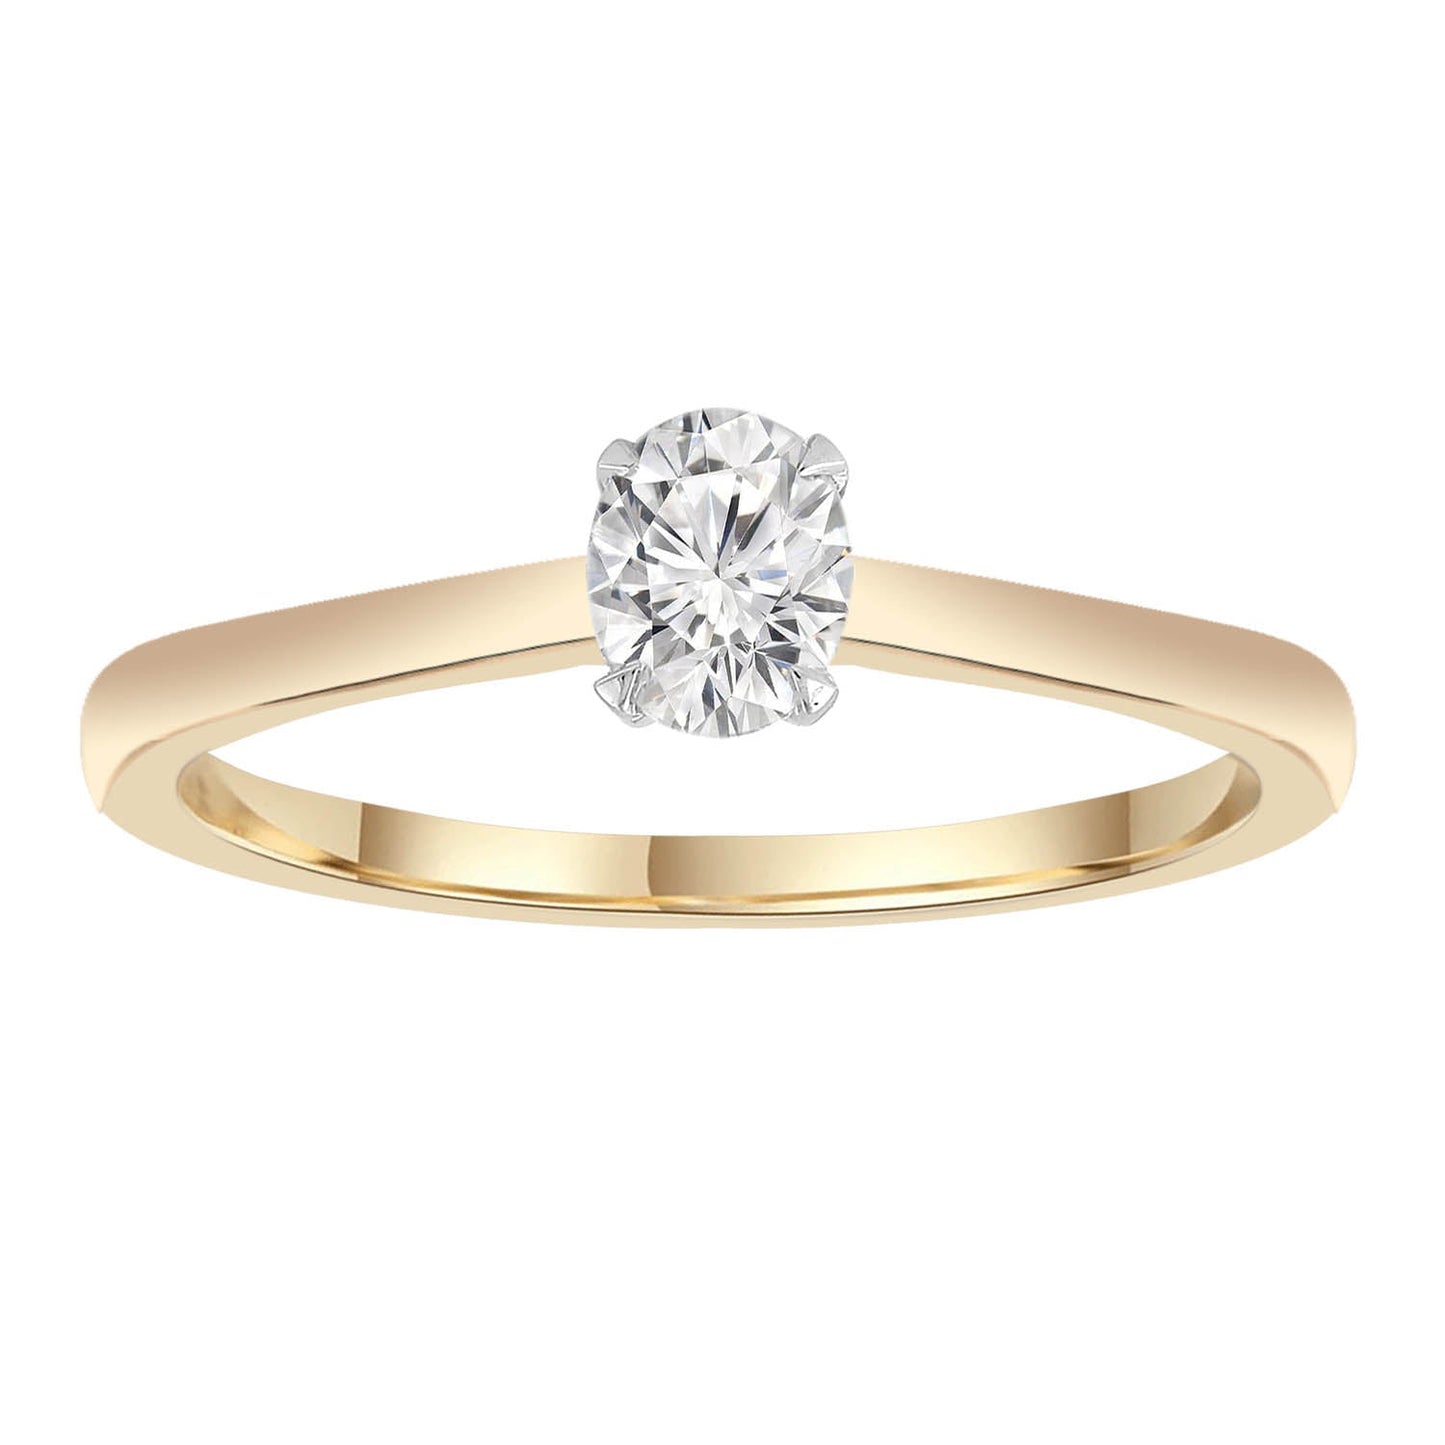 Diamond Solitaire Ring with 0.33ct Diamonds in 9K Yellow Gold